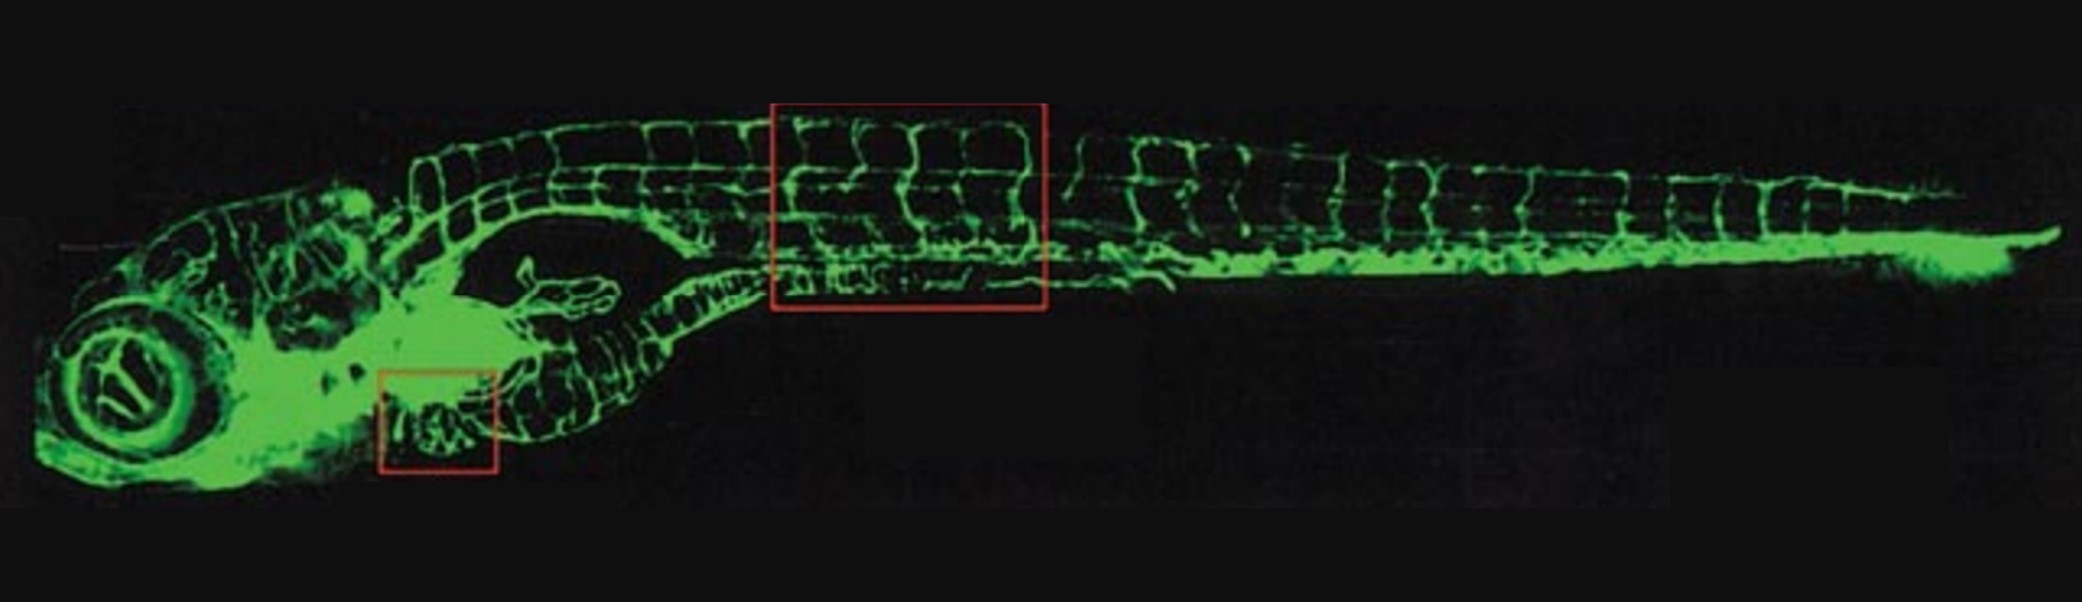 Fluorescent zebrafish and the detection of transgenic lines by the EggSorter